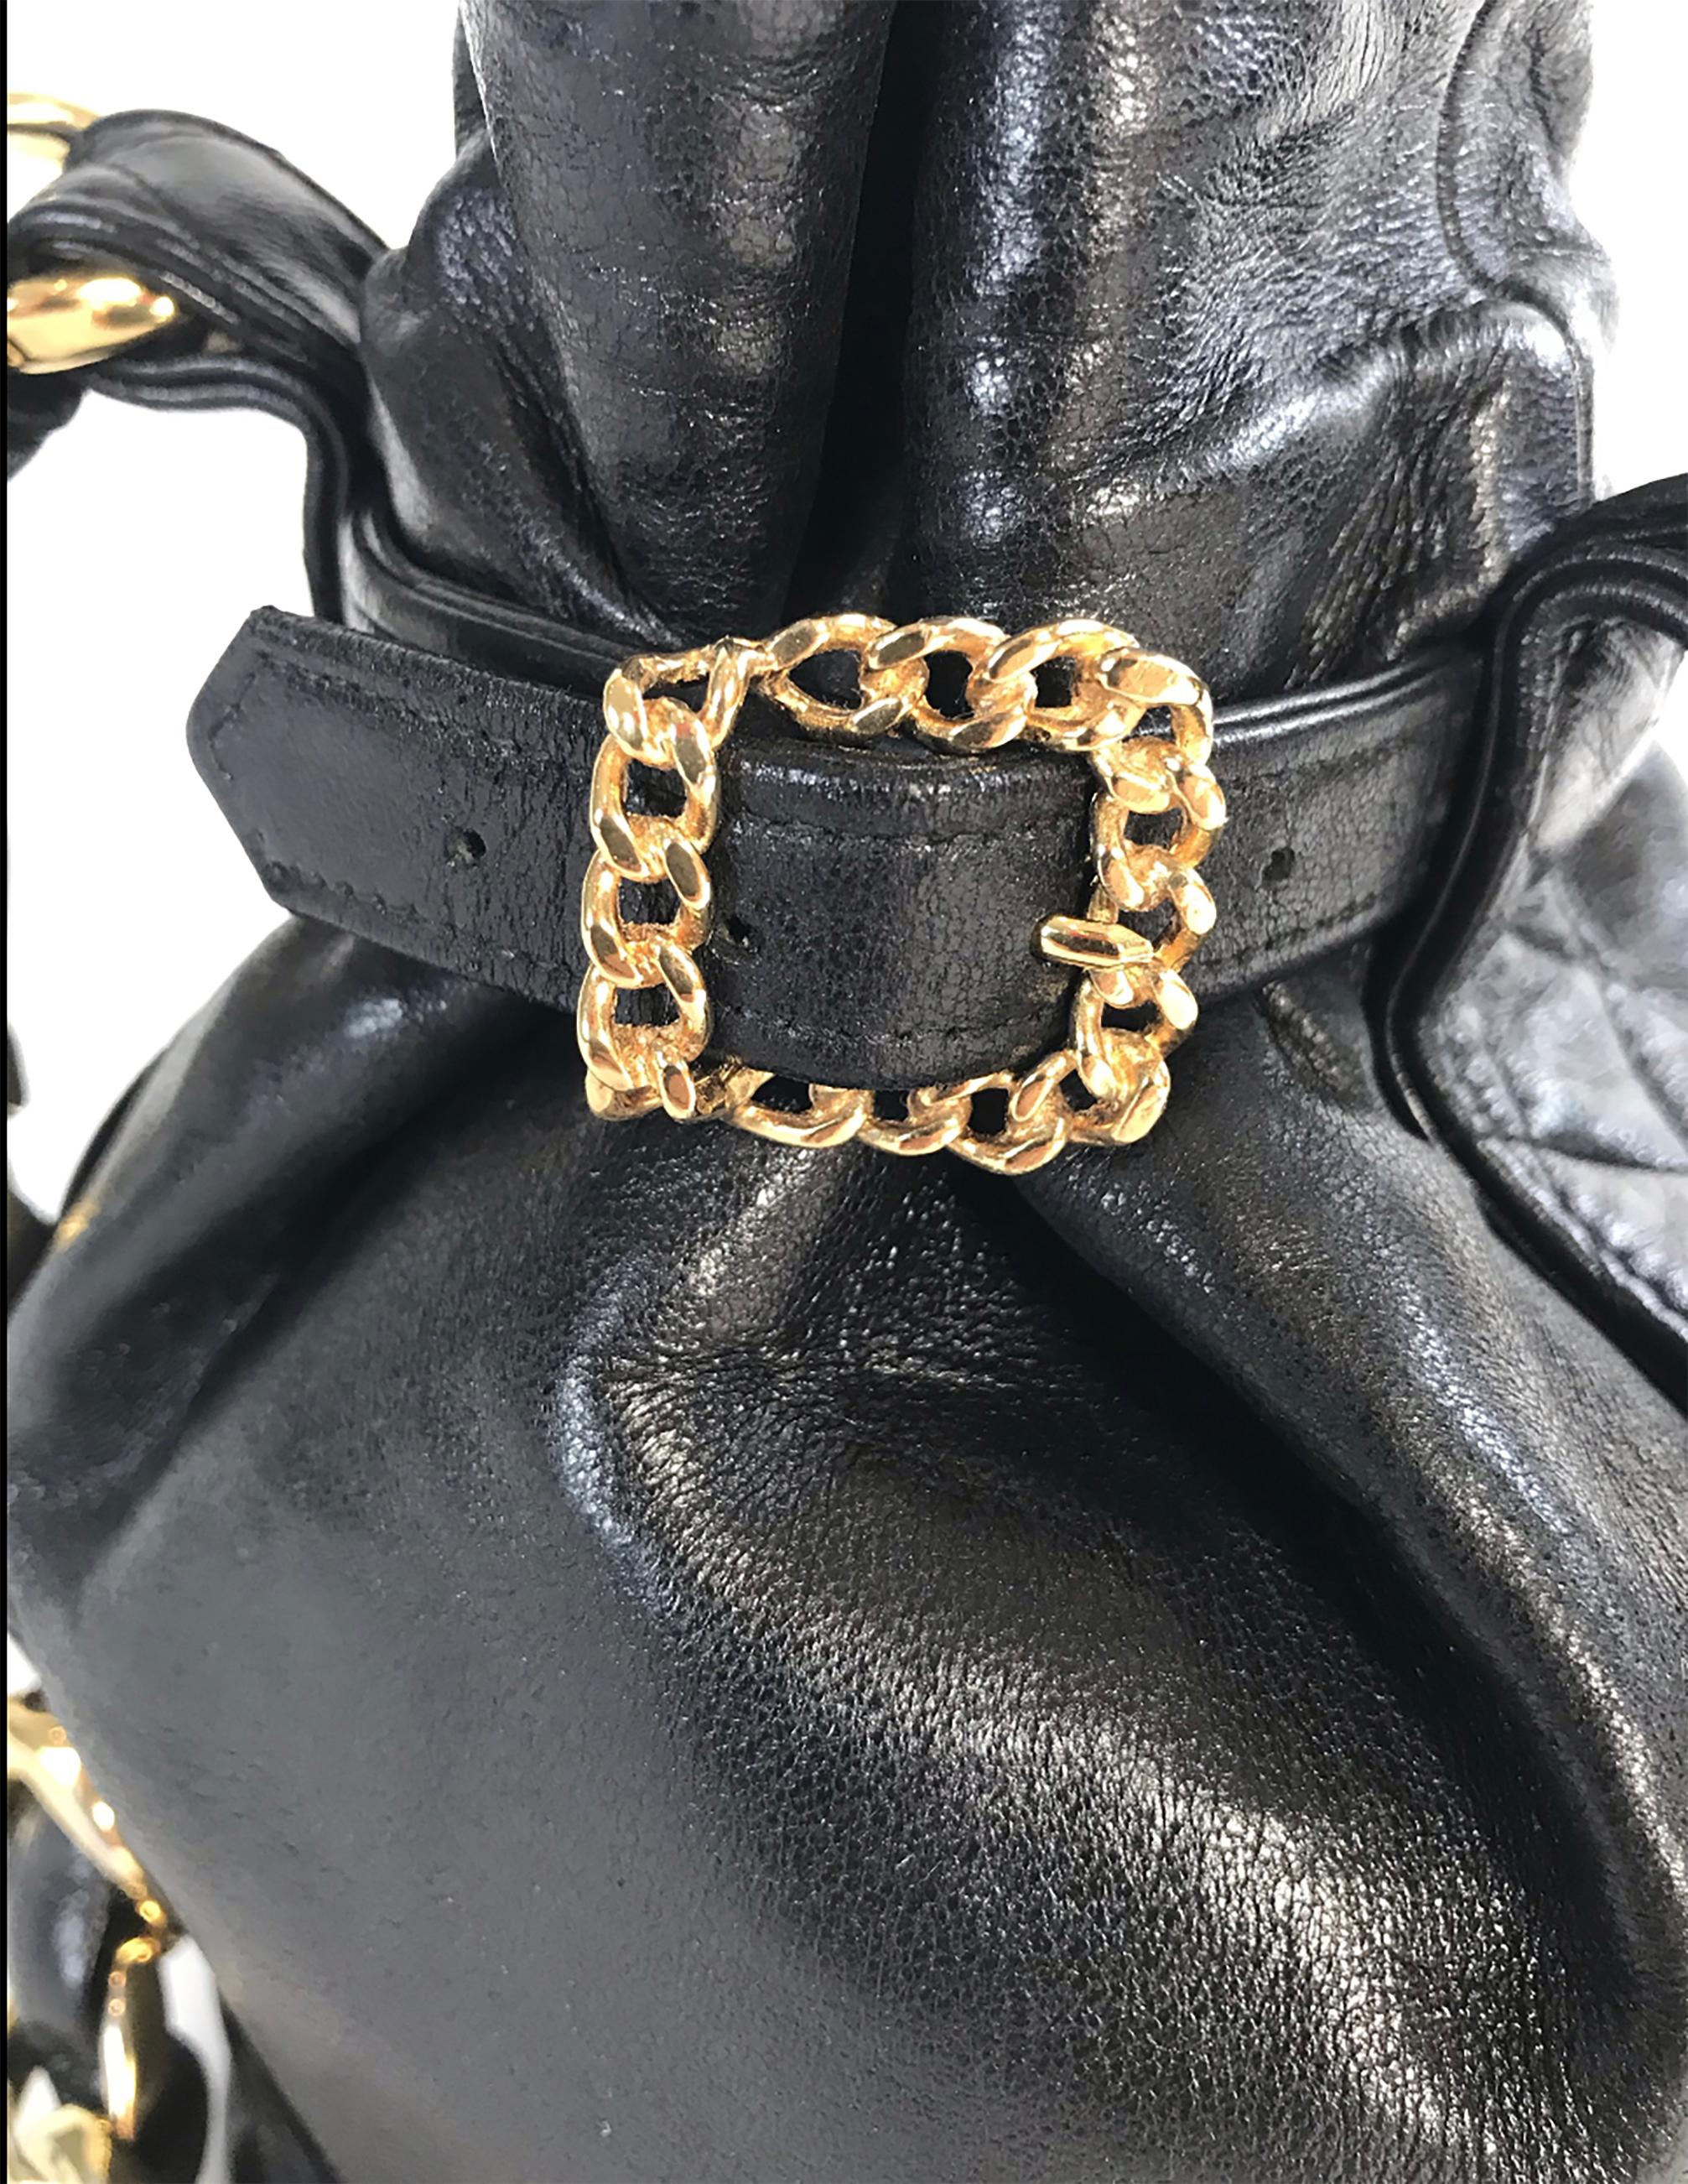 1980s CHANEL black leather quilted mini buckle bag. Condition: very good. 
Width: 7.5